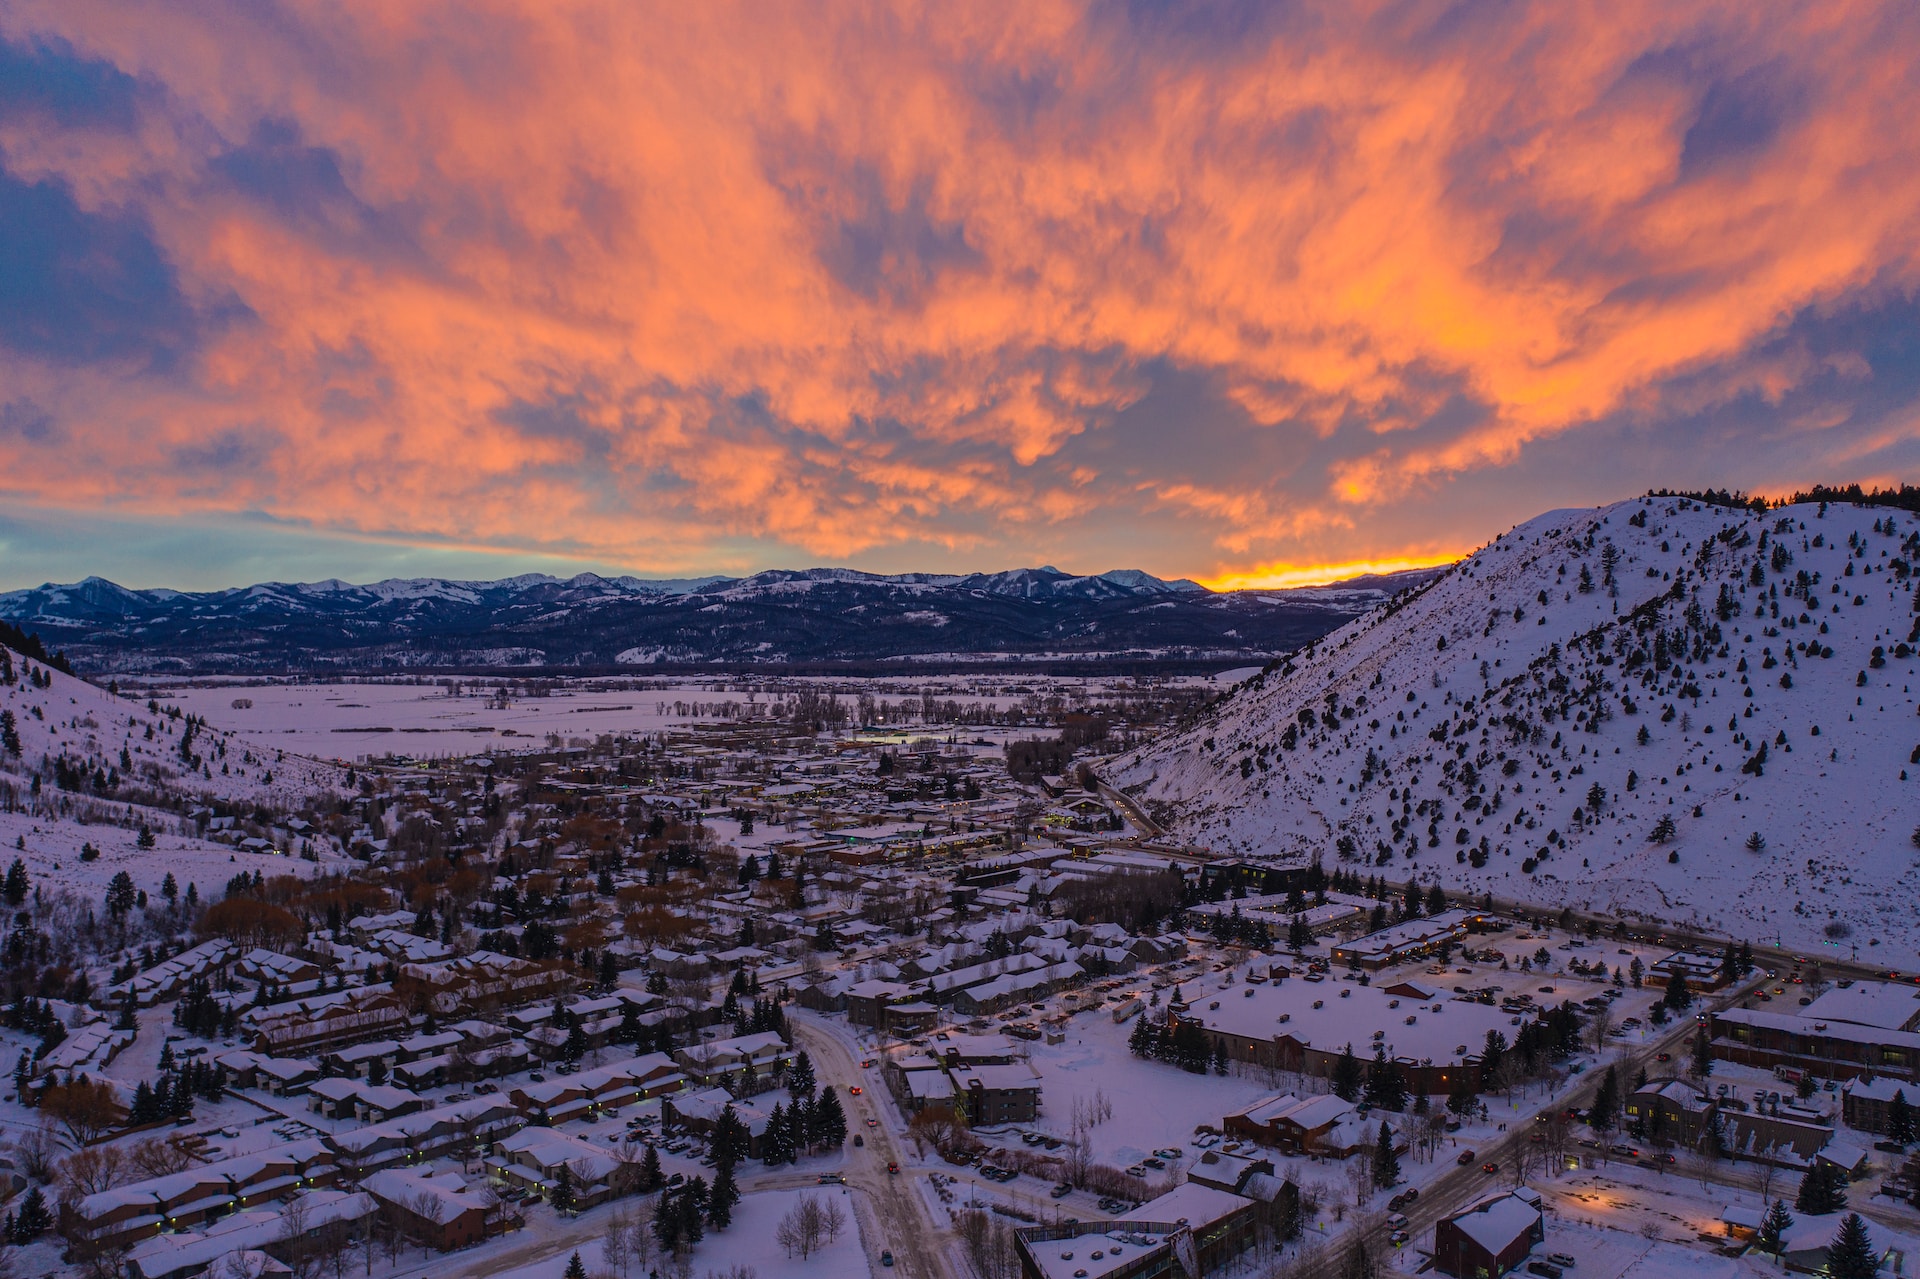 The winter sunset in Jackson Hole.